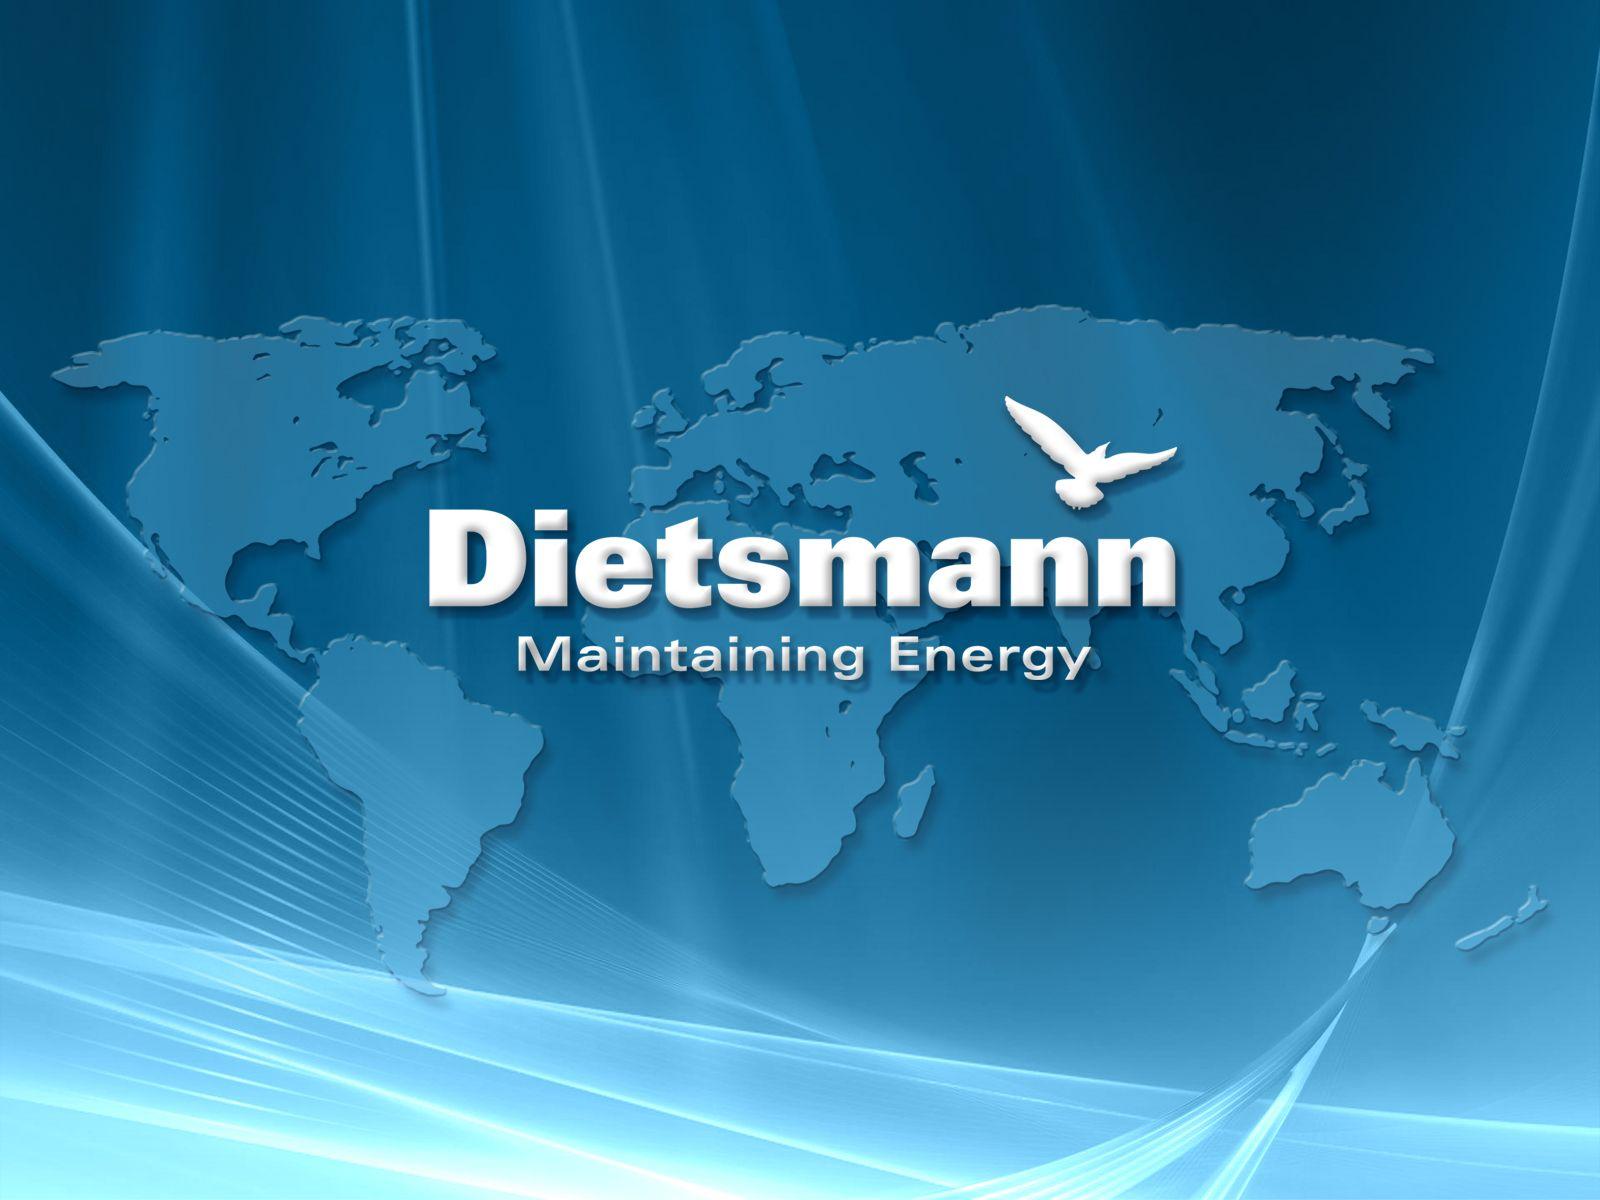 Dietsmann Wallpaper Operation and Maintenance services